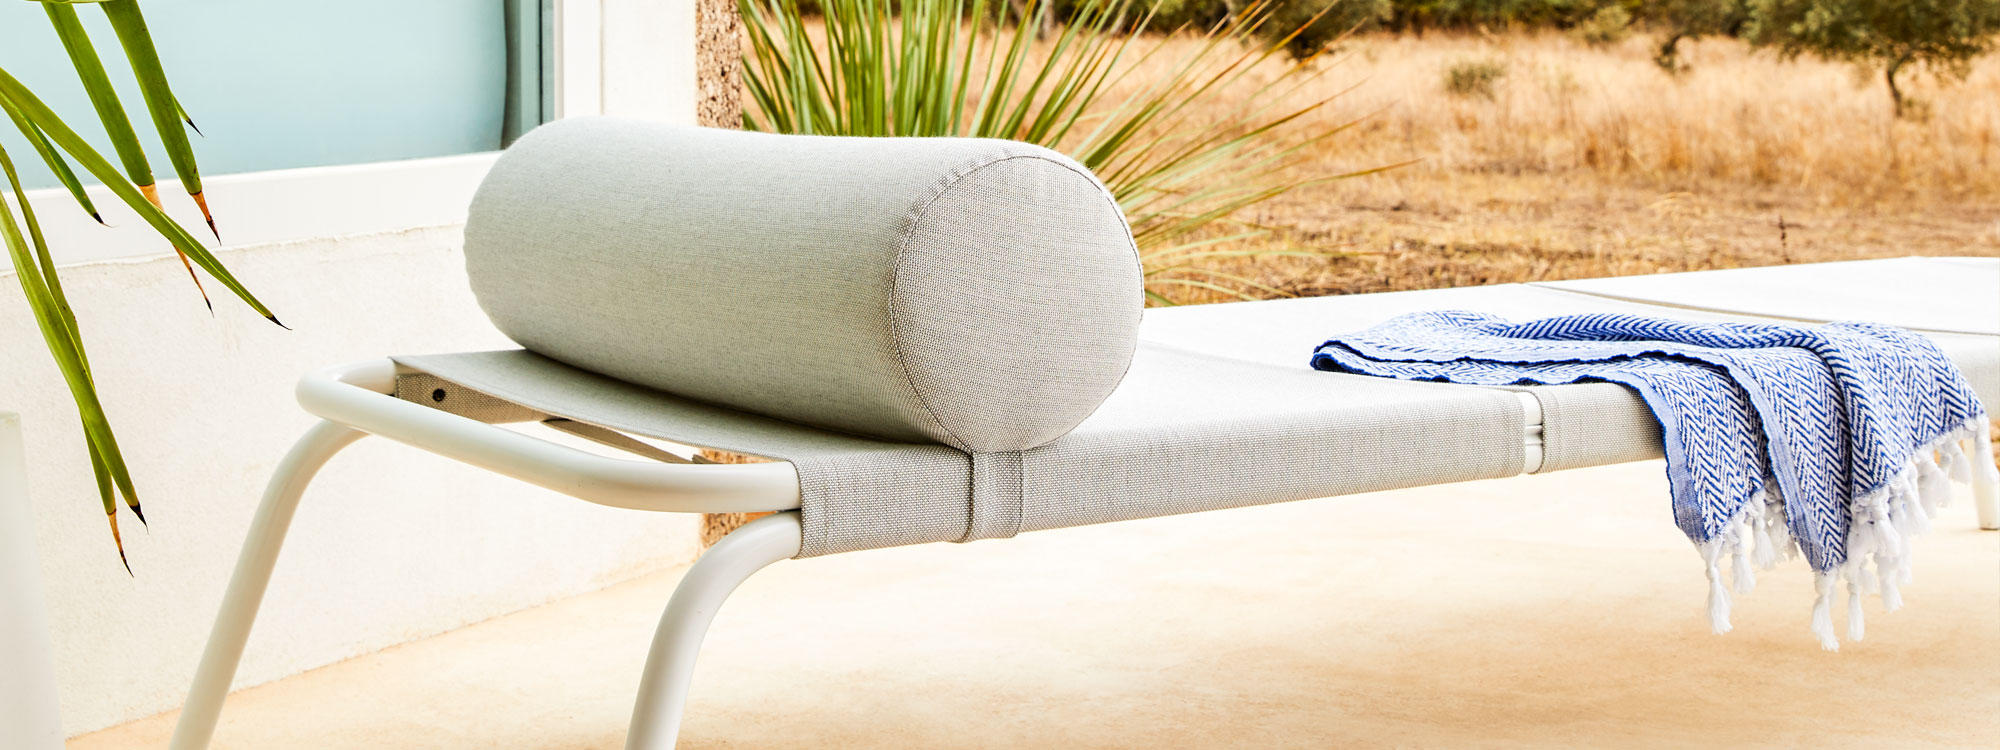 Genua lounger with Light-Grey frame & Batyline with scorched summer grasses in the background